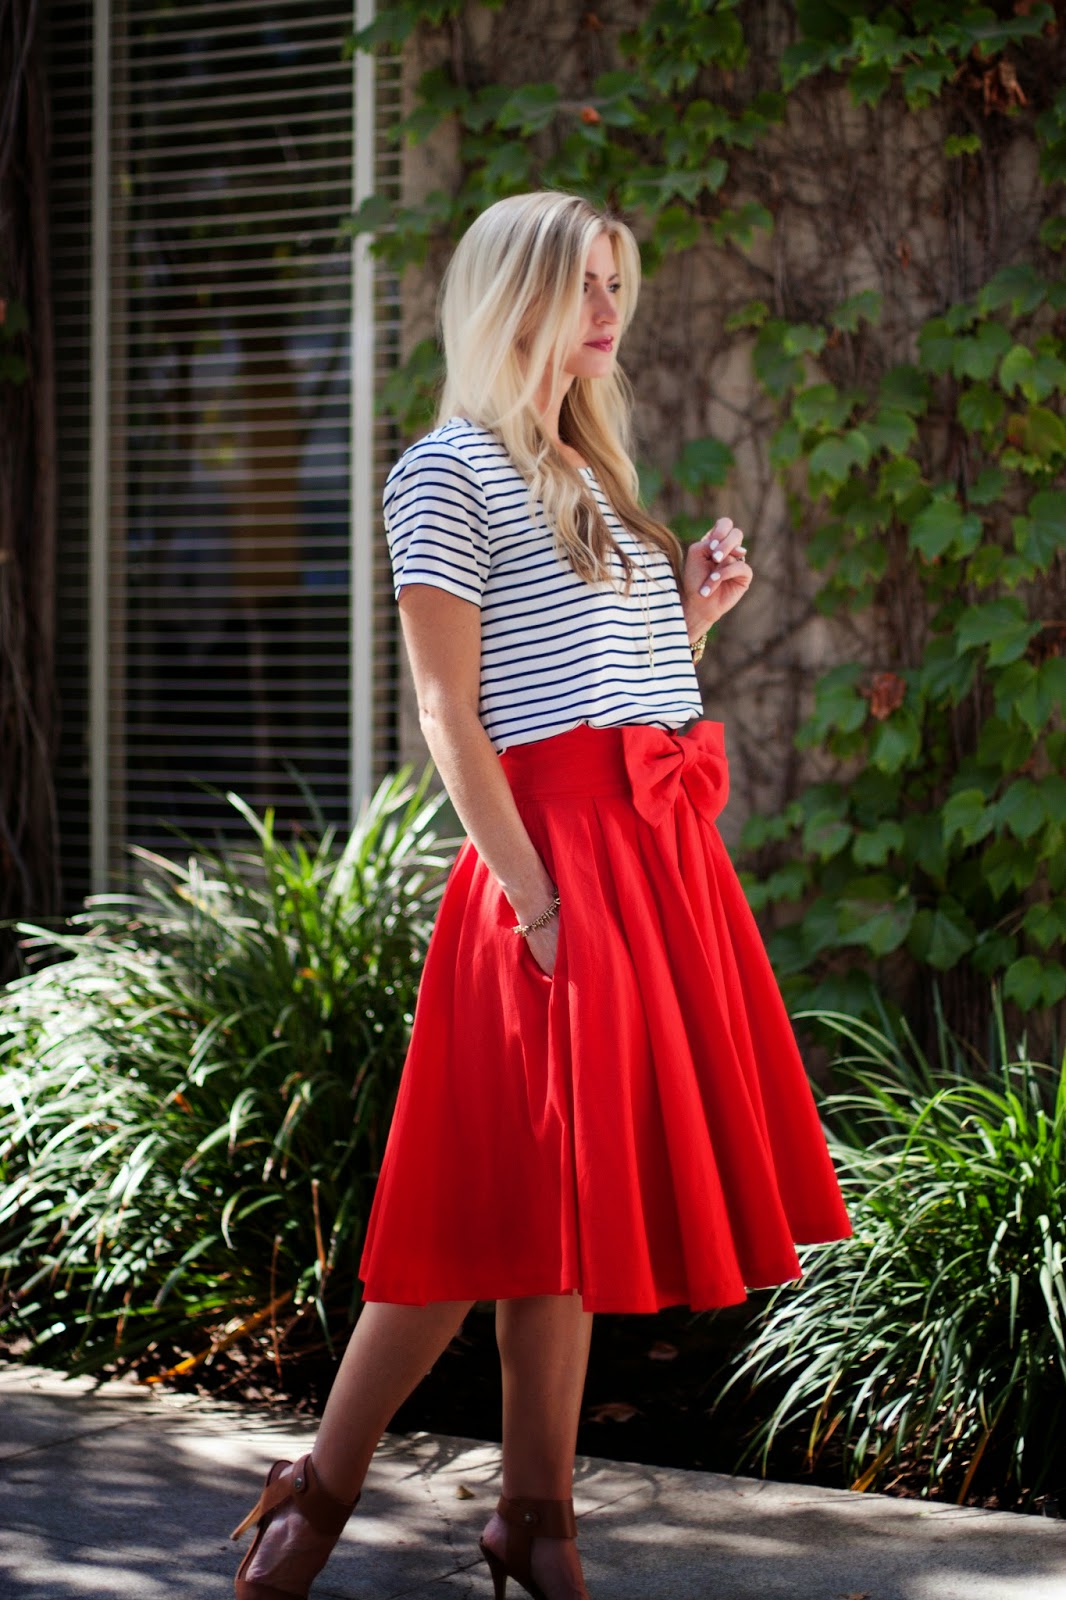 4th Of July Outfit Ideas That Feel Elevated  Striped dress outfit, Stripe  outfits, Stylish dresses